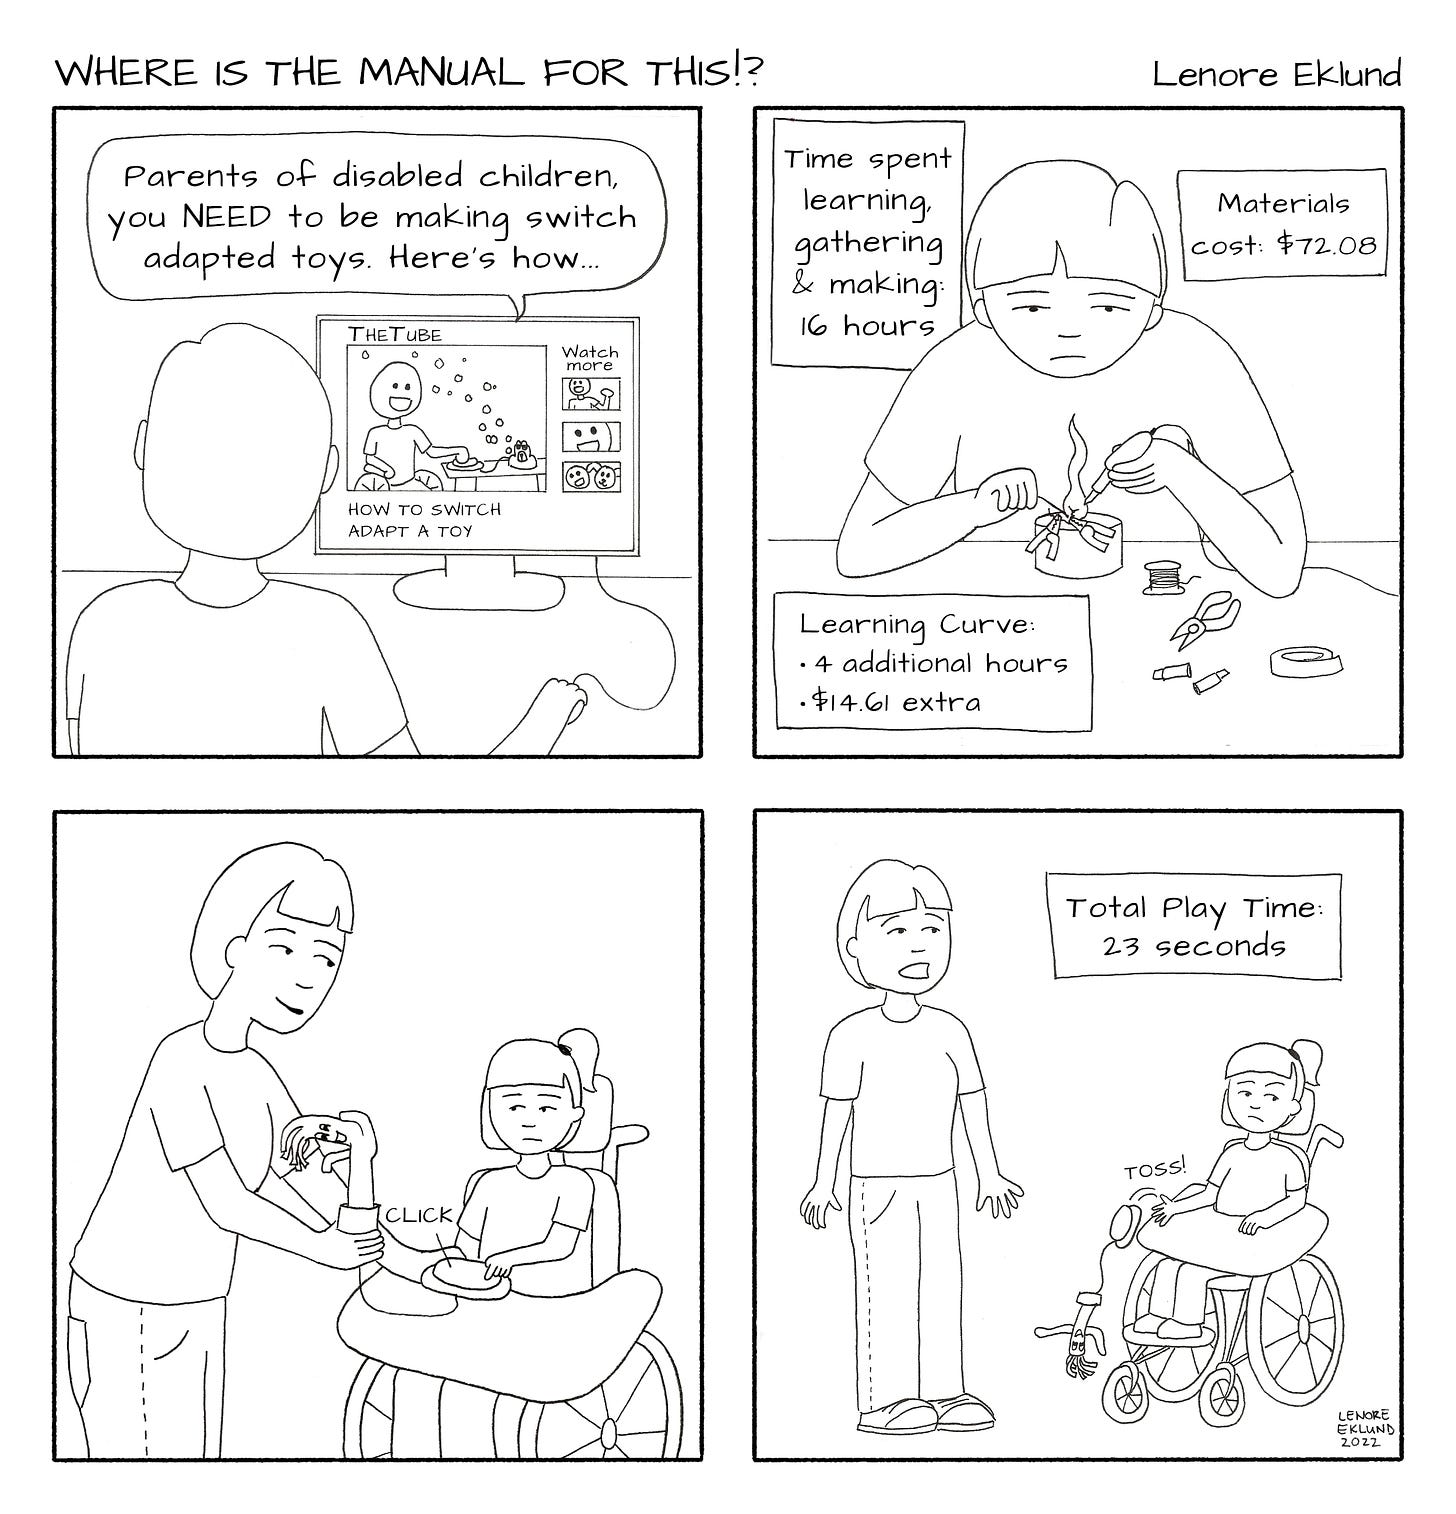 A four-panel cartoon in black and white line drawings. The first panel is the back of an adult looking at a video website called “The Tube.” A person in a wheelchair is pushing a button that makes a bubble machine blow bubbles and the title says “How to Switch Adapt a Toy.” The video’s speech bubble reads: “Parents of disabled children you NEED to be making switch adapted toys. Here’s how…” The second panel shows the adult sautering a button with a concentrated expression. The caption reads: Time spent learning, gathering and making: 16 hours. Materials cost: $72.08. Learning curve: 4 additional hours; $14.61 extra dollars In the third panel, the parent is giving the switch-adapted pop-up toy to a child in a wheelchair. The parent is smiling; the child is not.  In the fourth panel, the child is looking away with a frown and the toy has been tossed to the floor. The parent is shocked. The caption reads: Total play time: 23 seconds. 